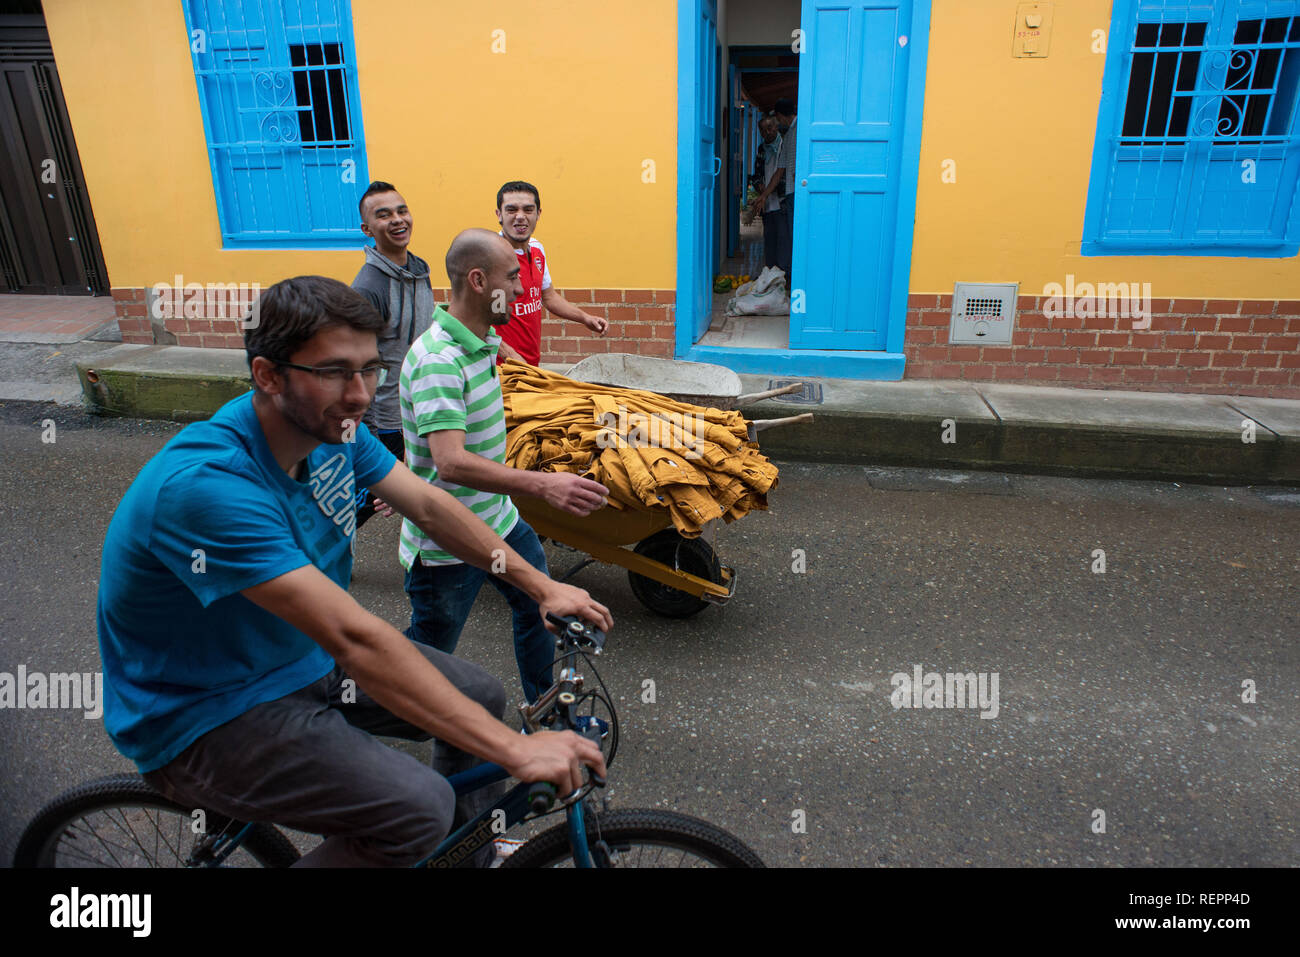 Donmatias, Antioquia: Young people carry new trousers in a wheelbarrow Stock Photo